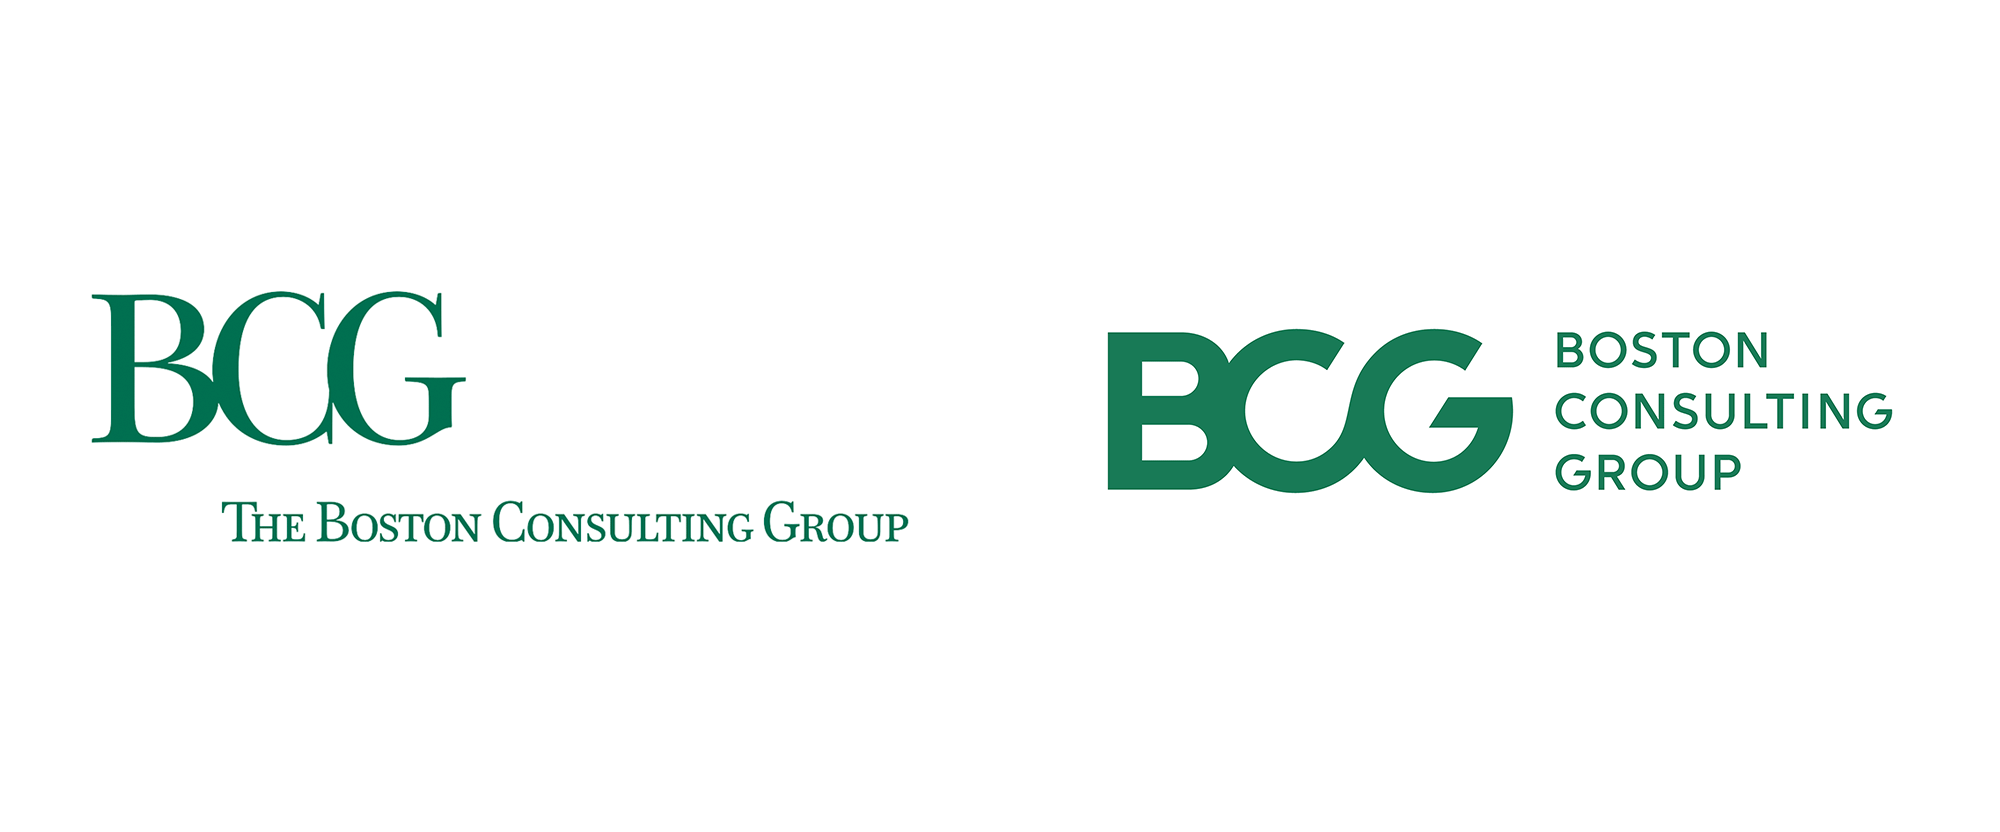 Brand New Logo - Brand New: New Logo and Identity for Boston Consulting Group